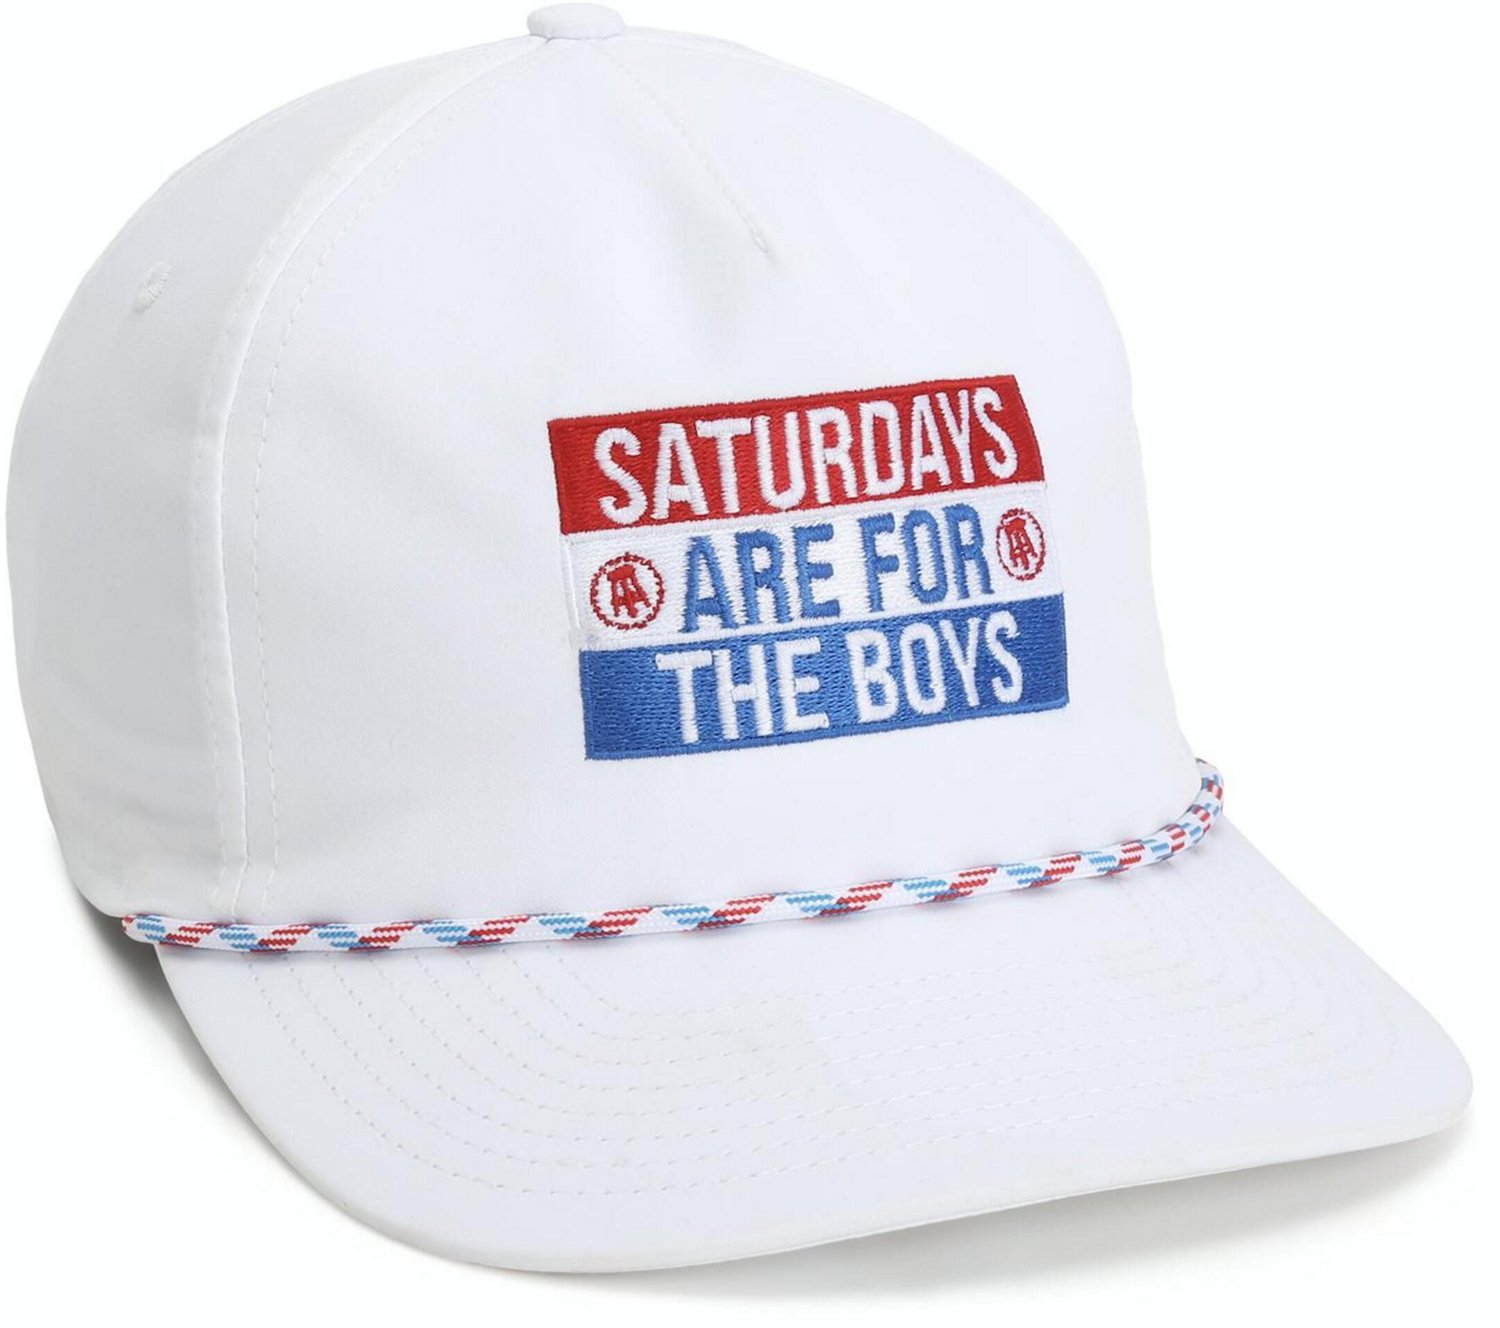 Barstool Sports Mens Saturdays Are For The Boys Snapback Hat Academy